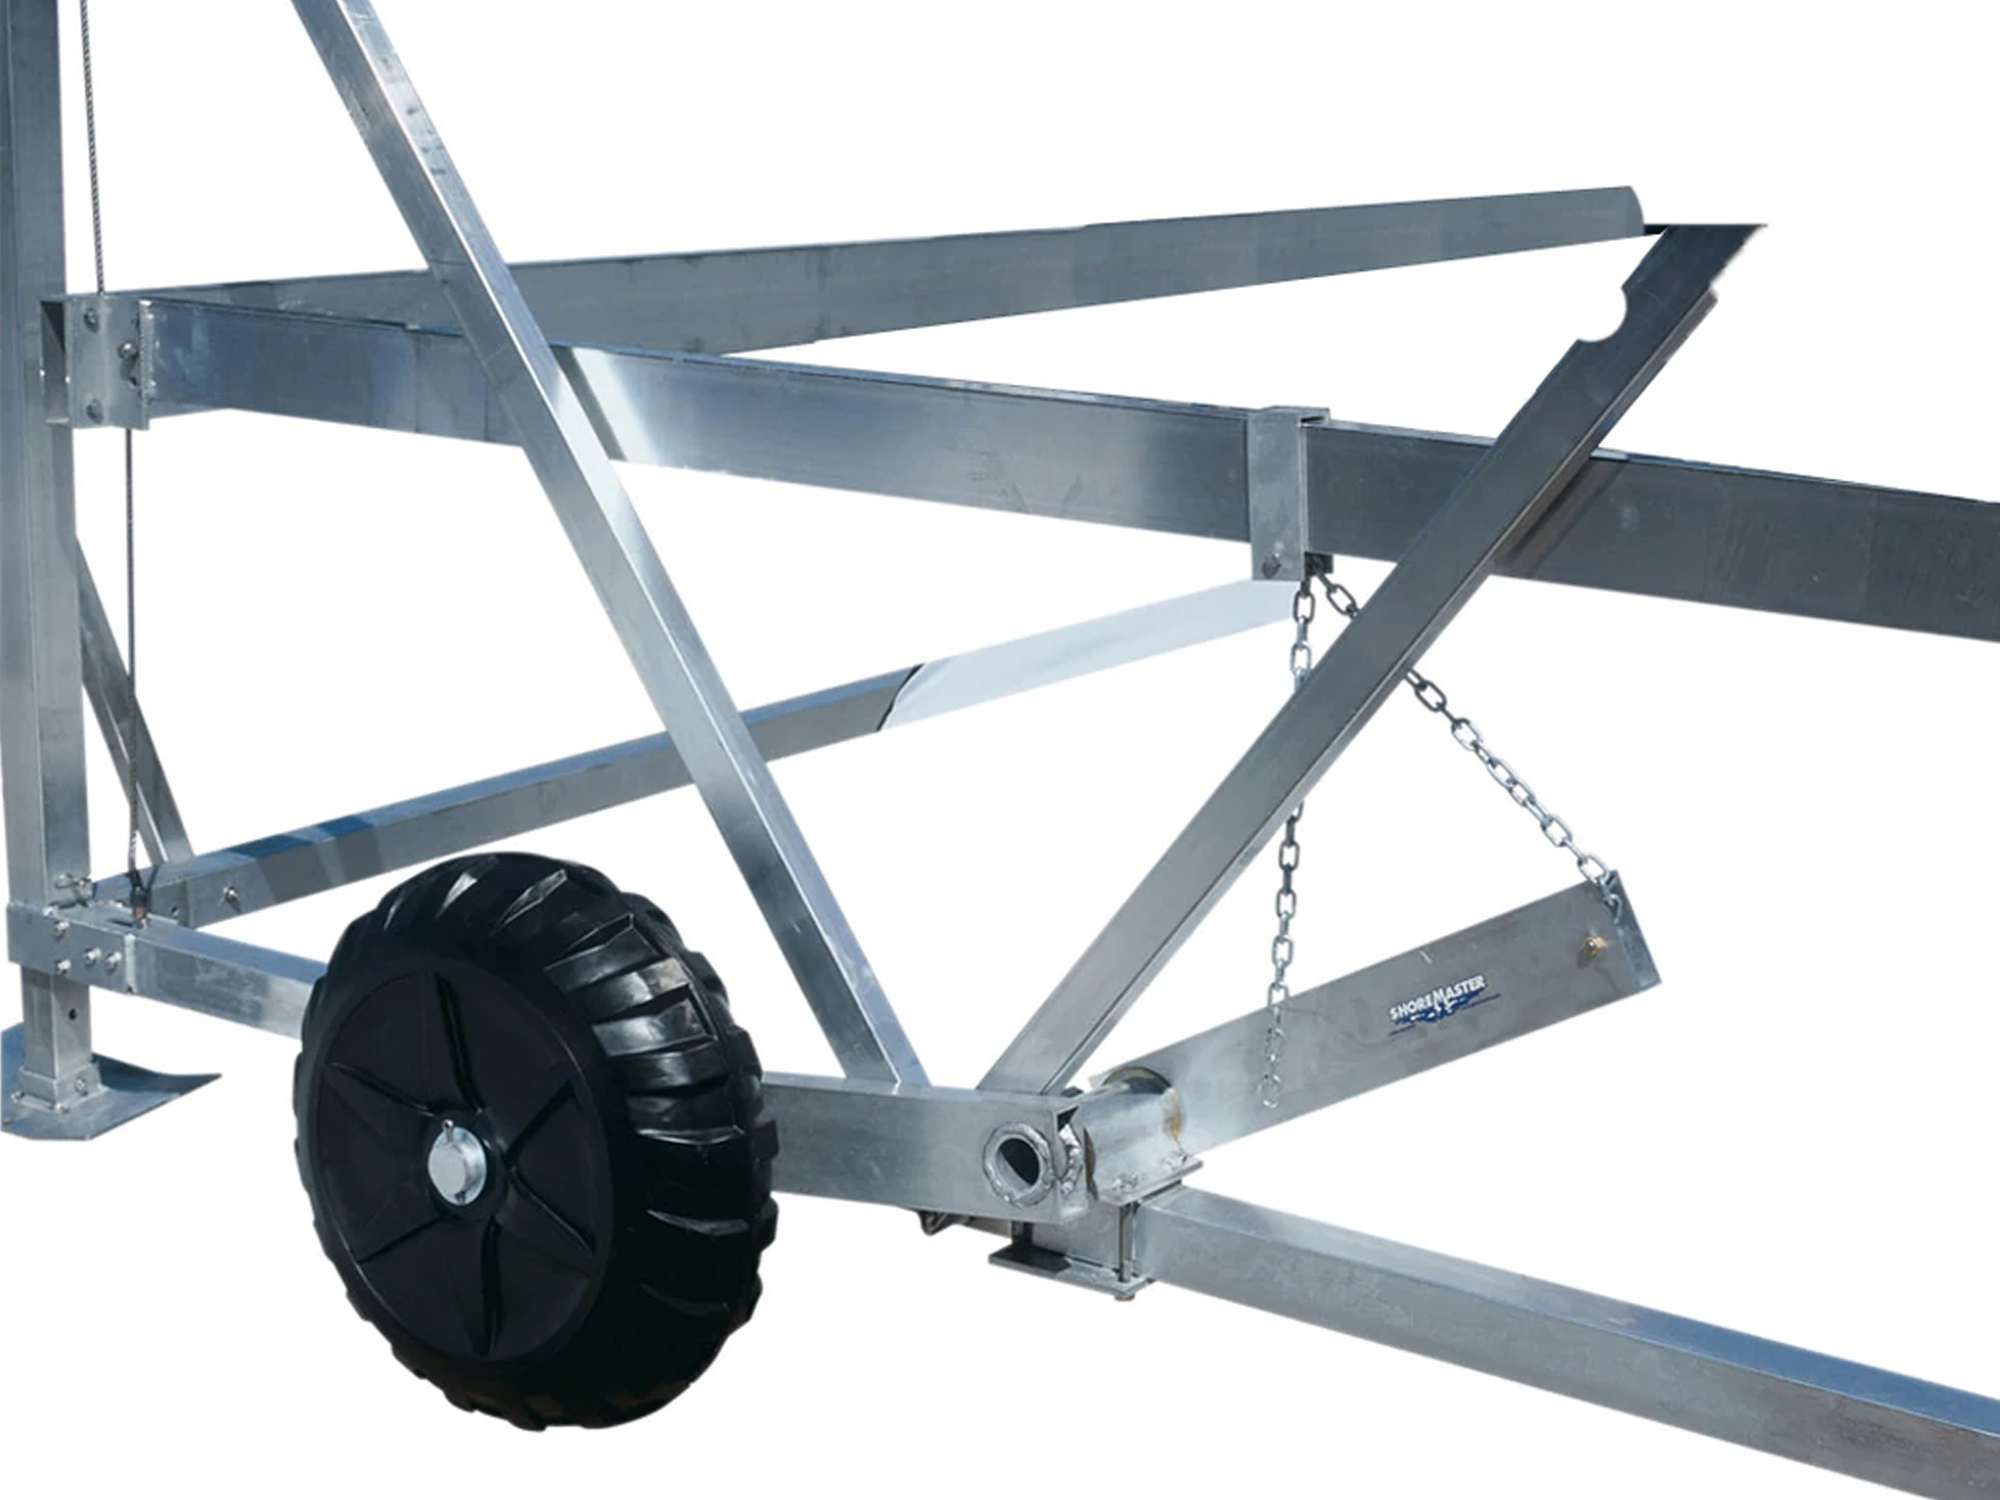 Boat Lift Wheel Caddy & Kit: Simplify Your Boat Lift Installation